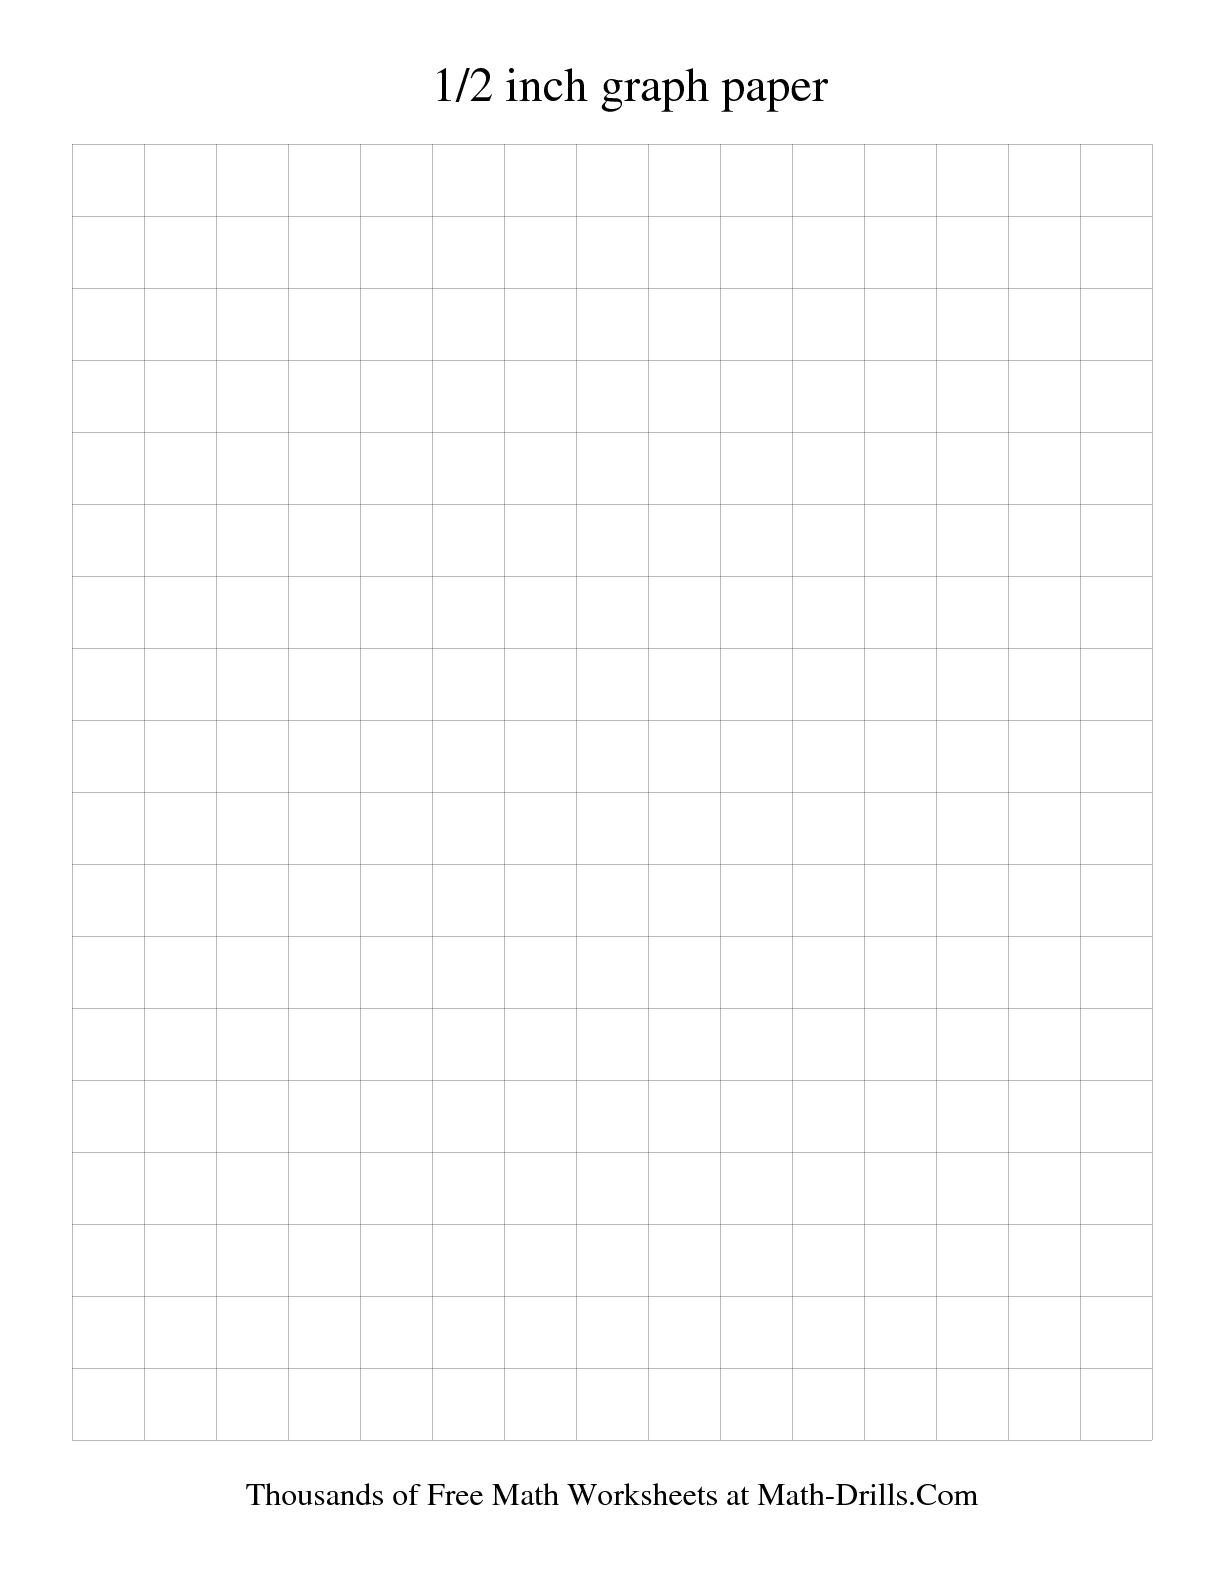 1 2 Inch Graph Paper Image